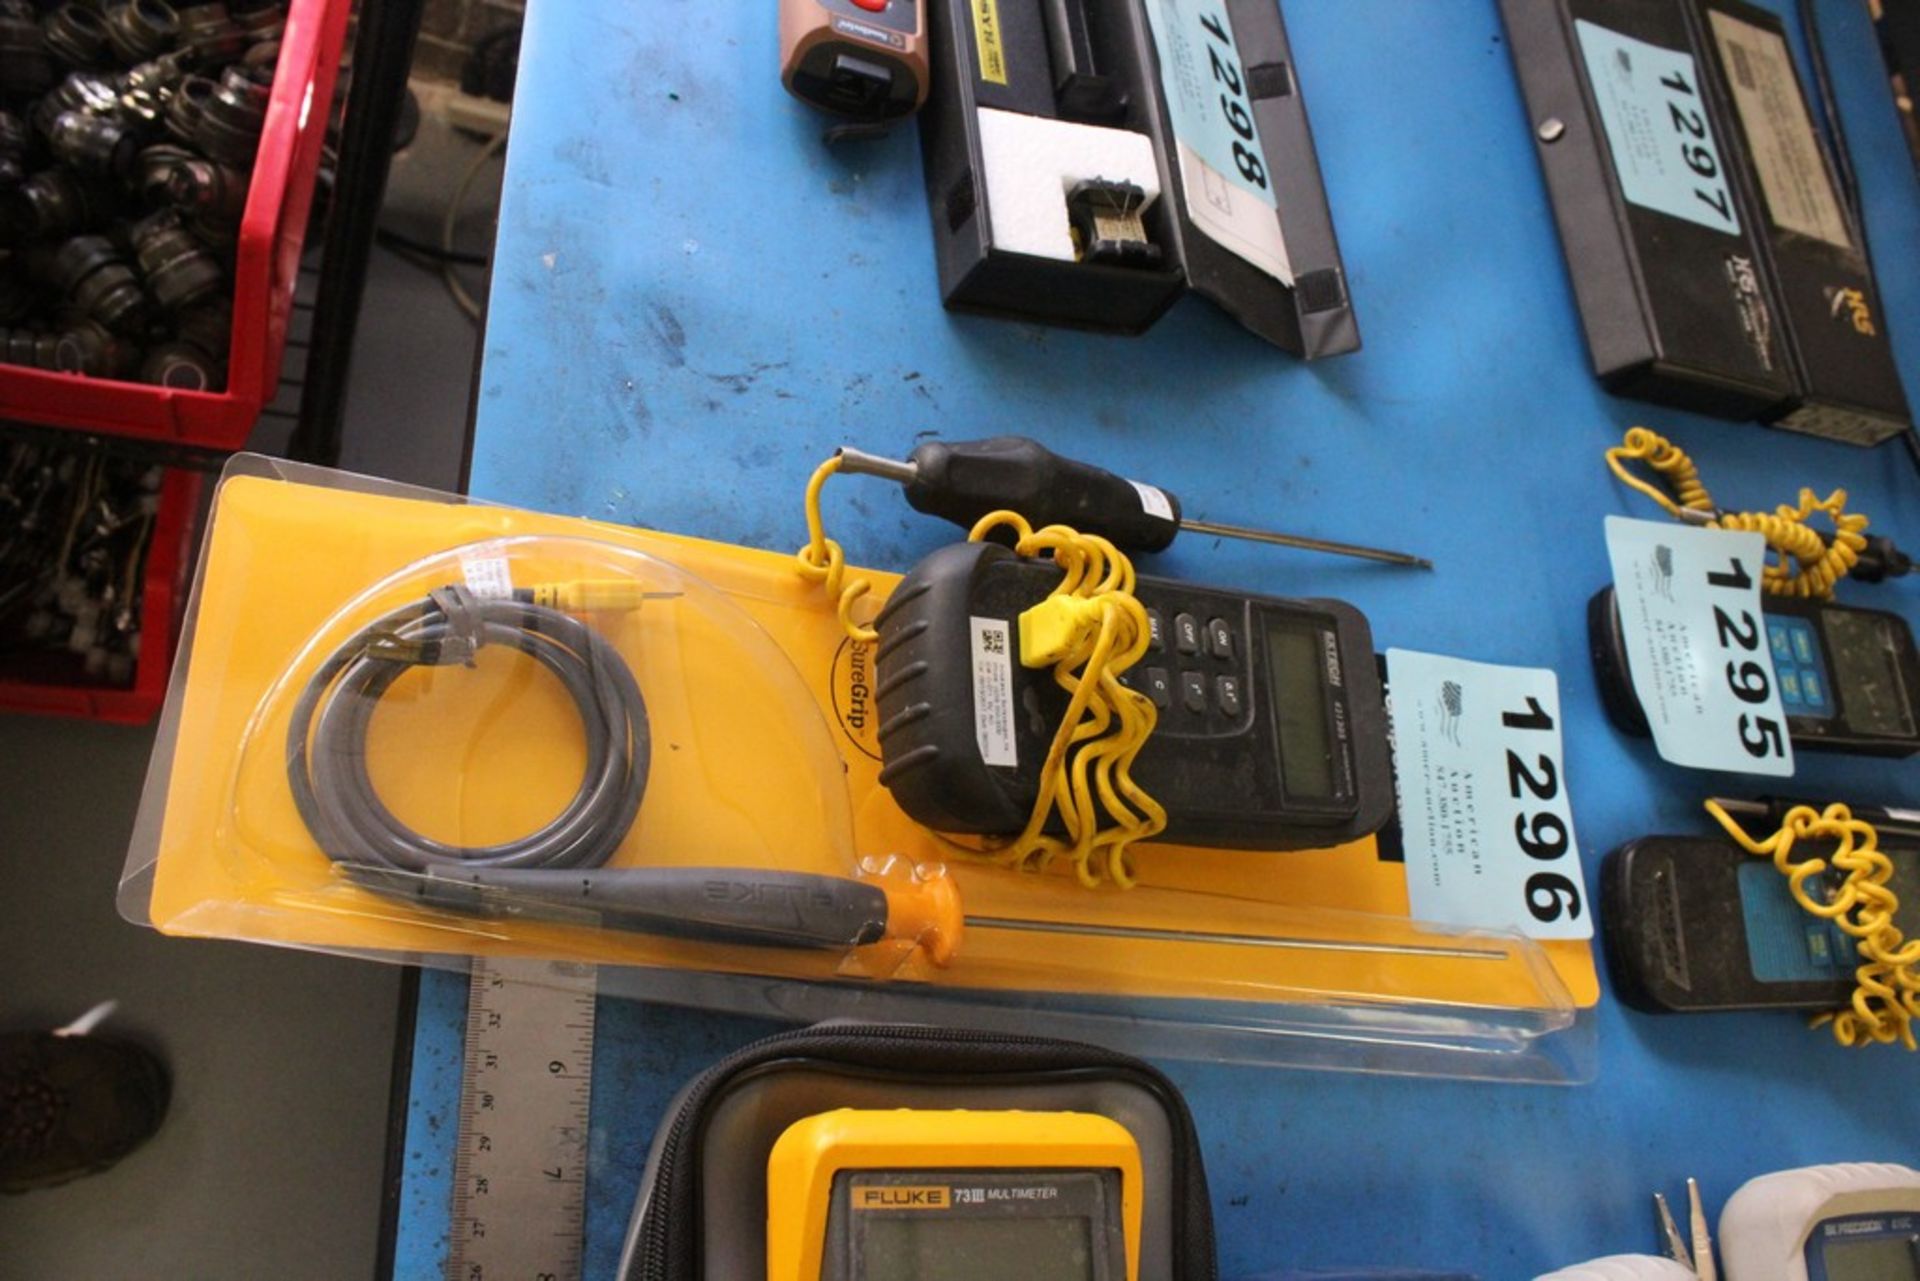 EXTECH THERMOMETER AND FLUKE TEMPATURE PROBE